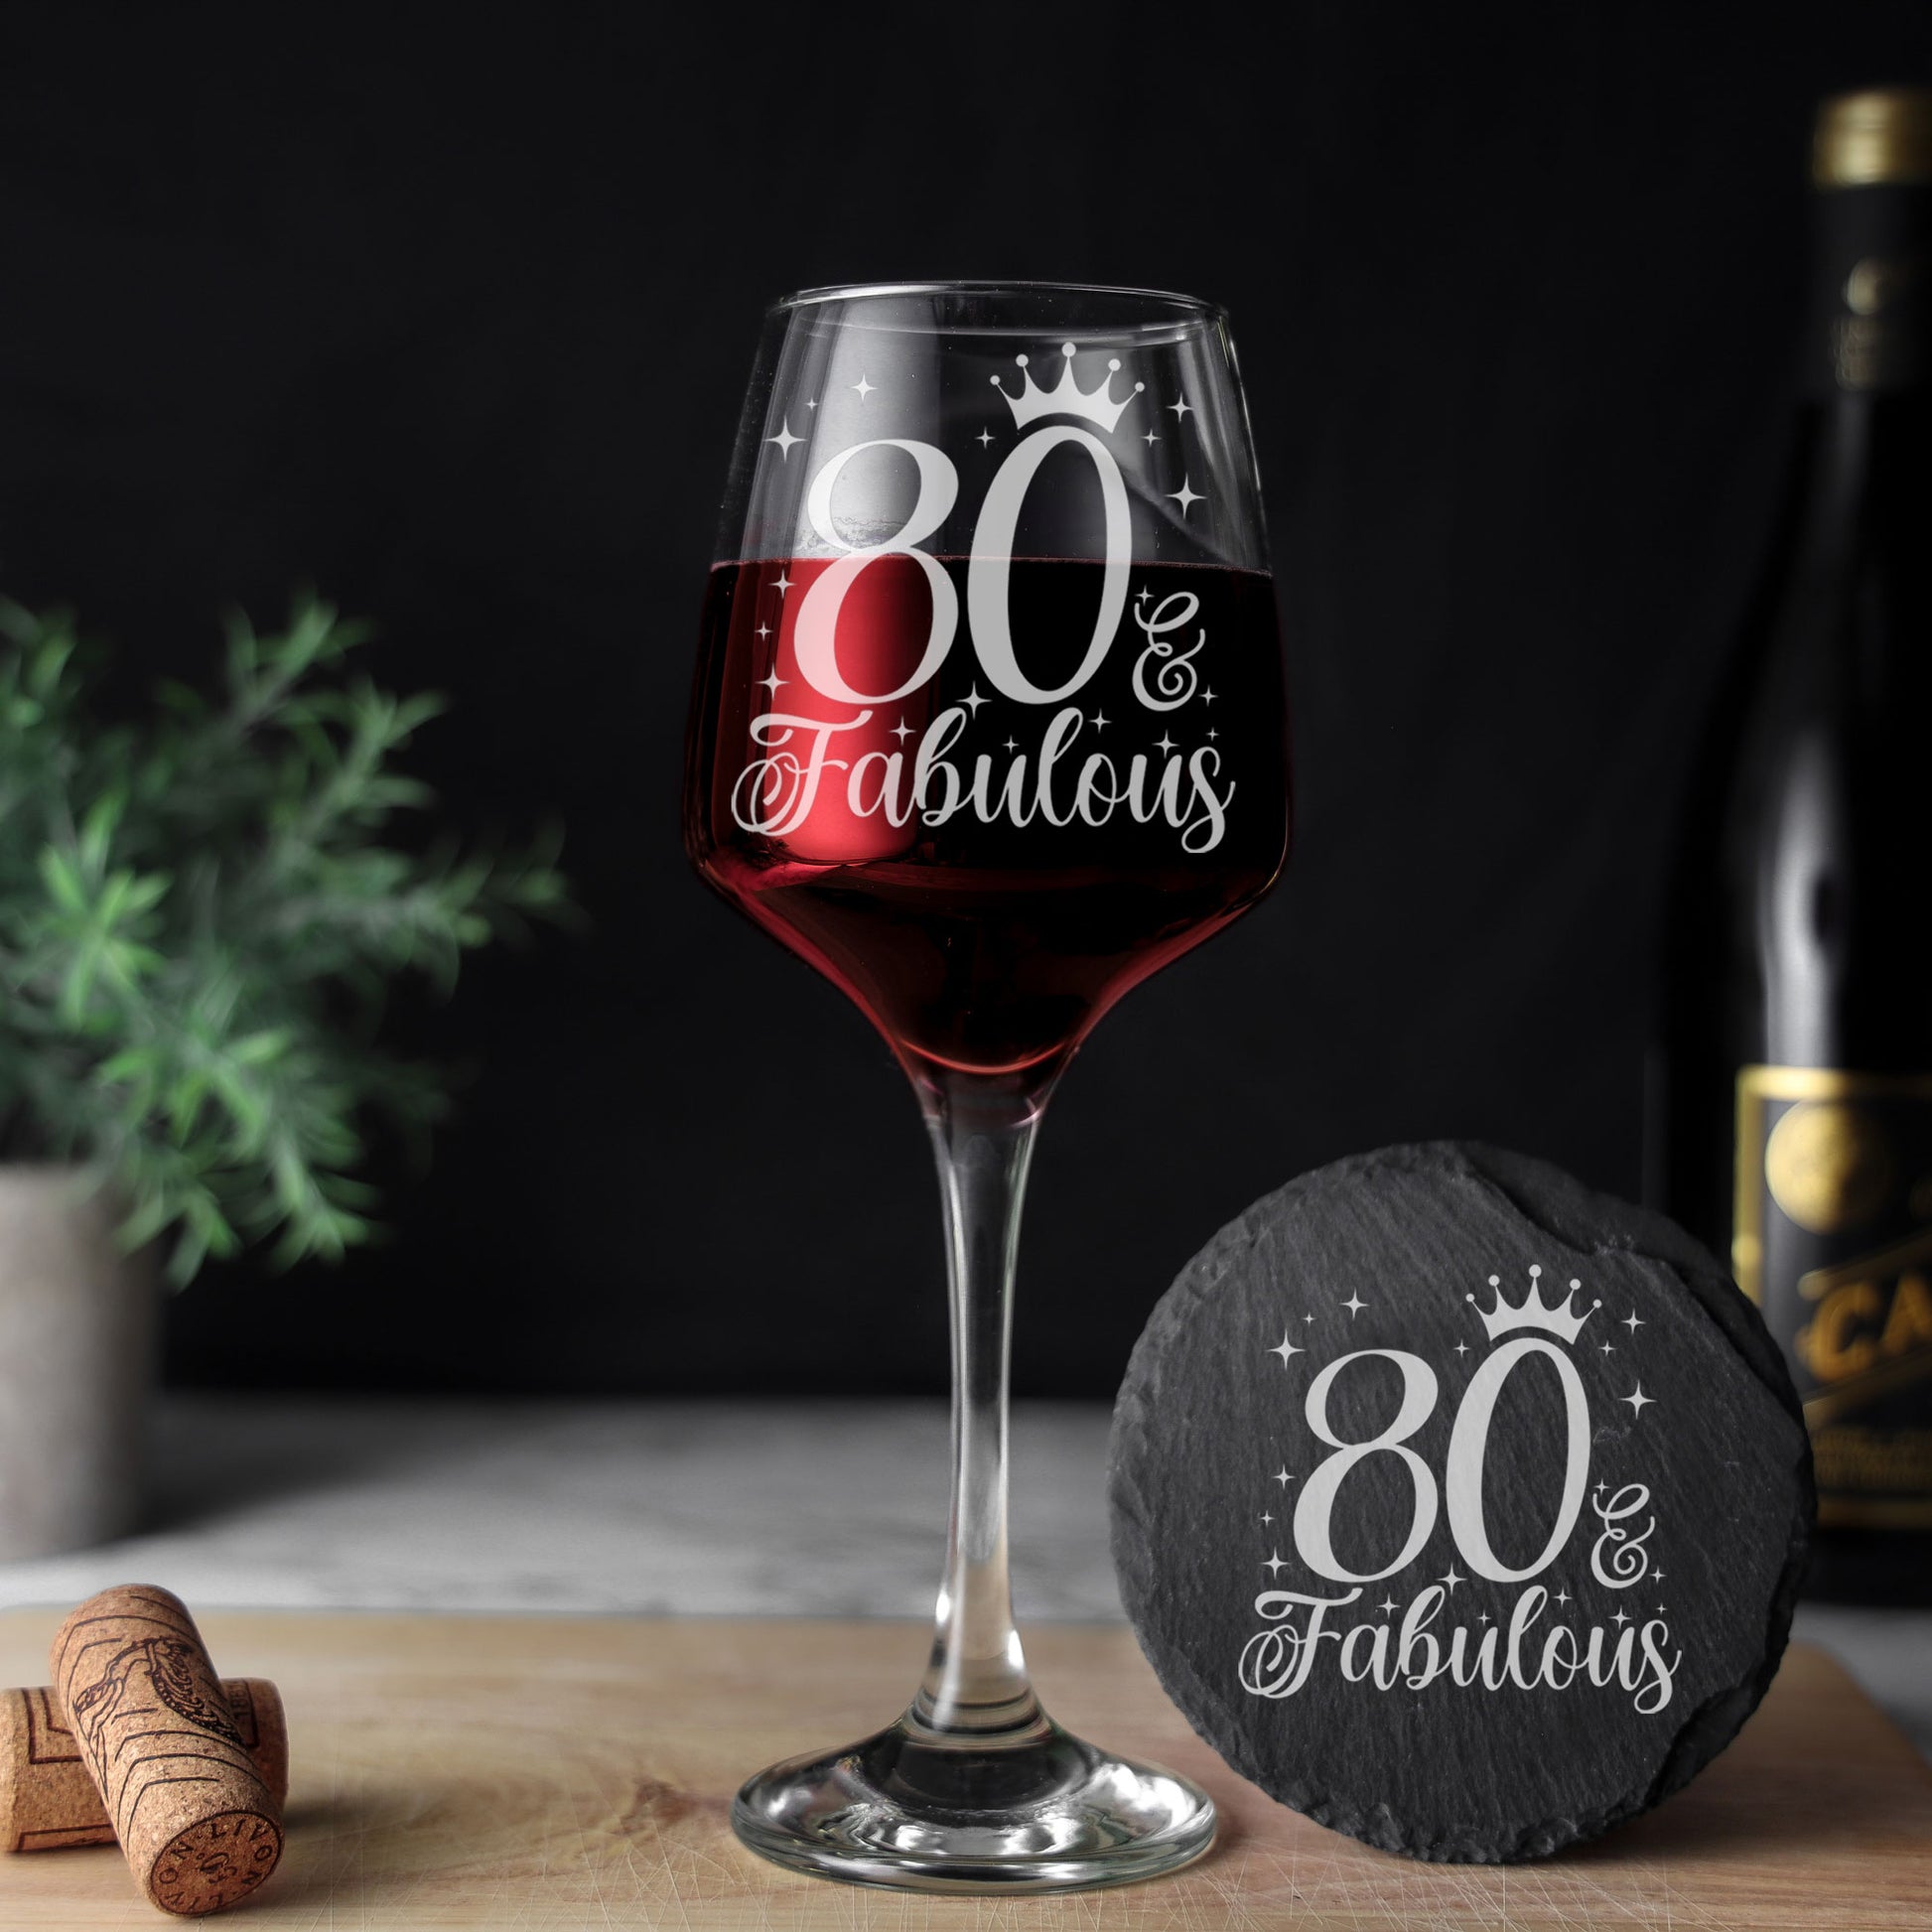 80 & Fabulous 80th Birthday Gift Engraved Wine Glass and/or Coaster Set  - Always Looking Good - Glass & Round Coaster  